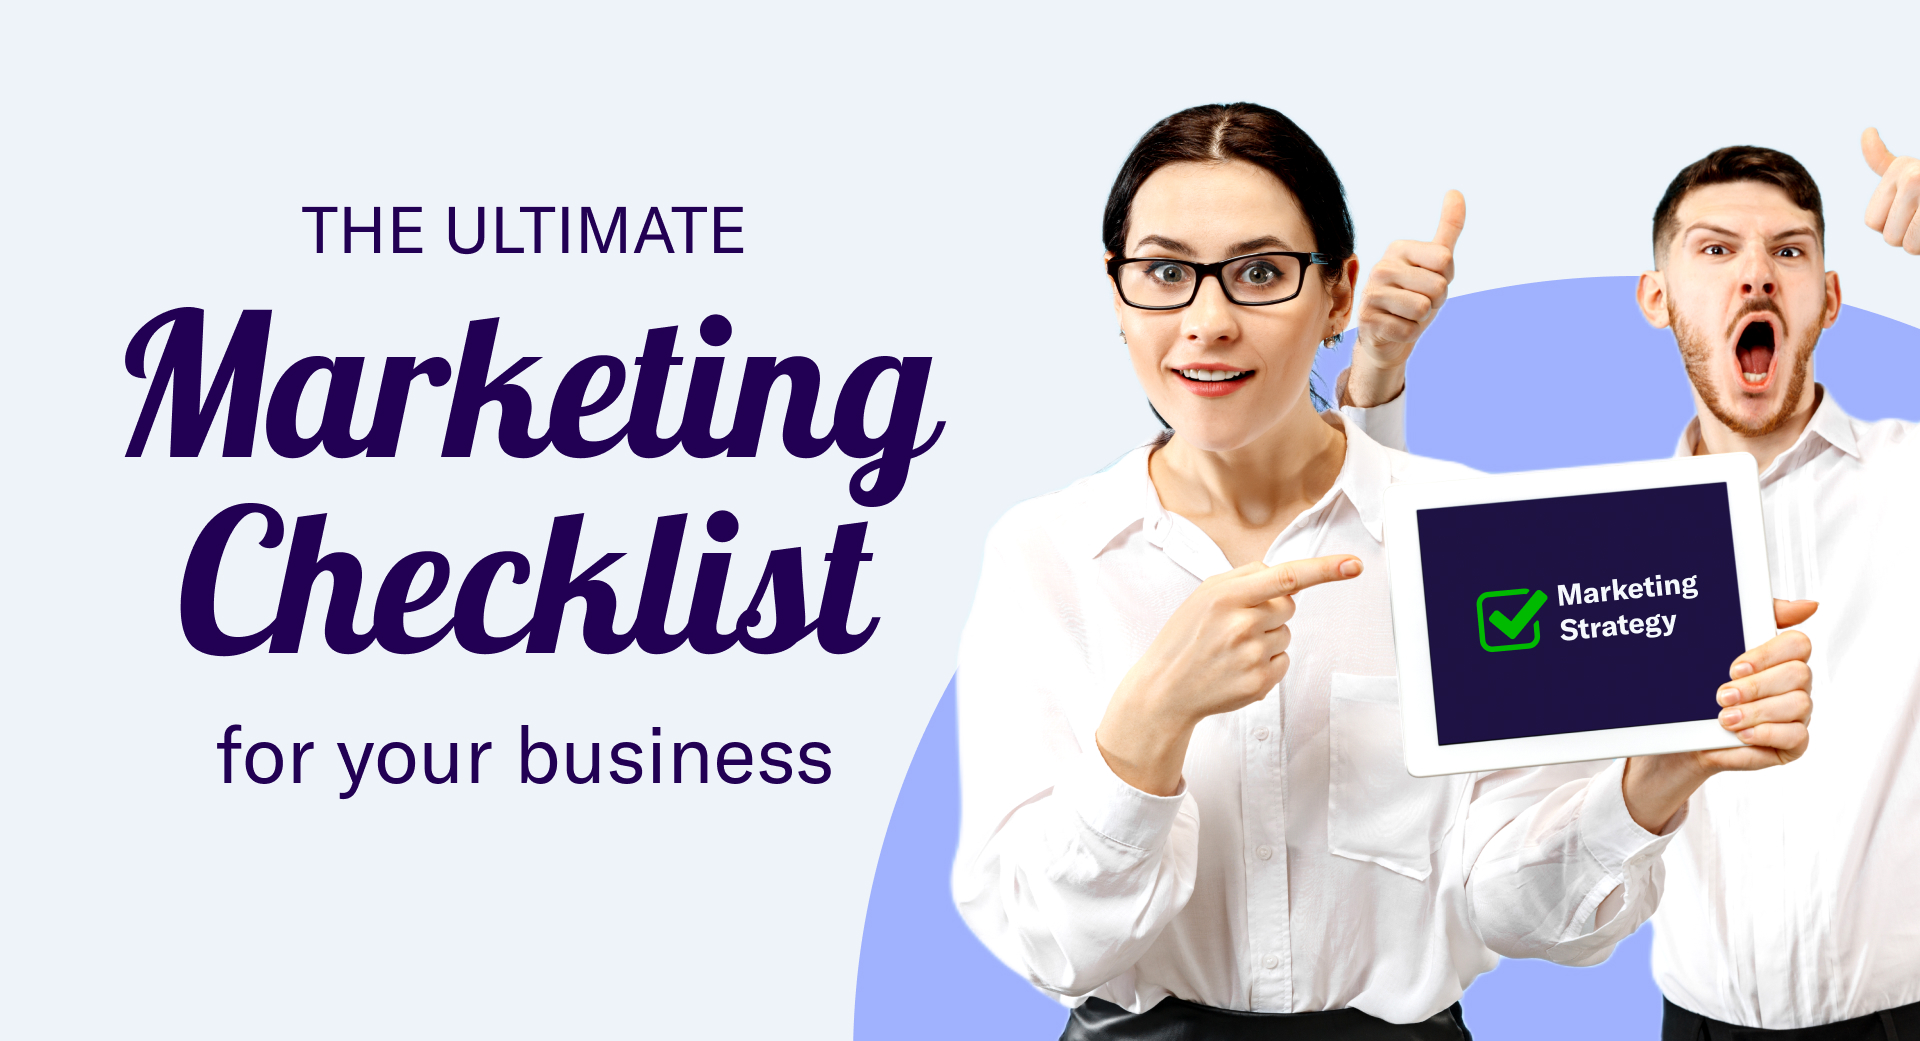 The Ultimate Marketing Checklist for Your Business